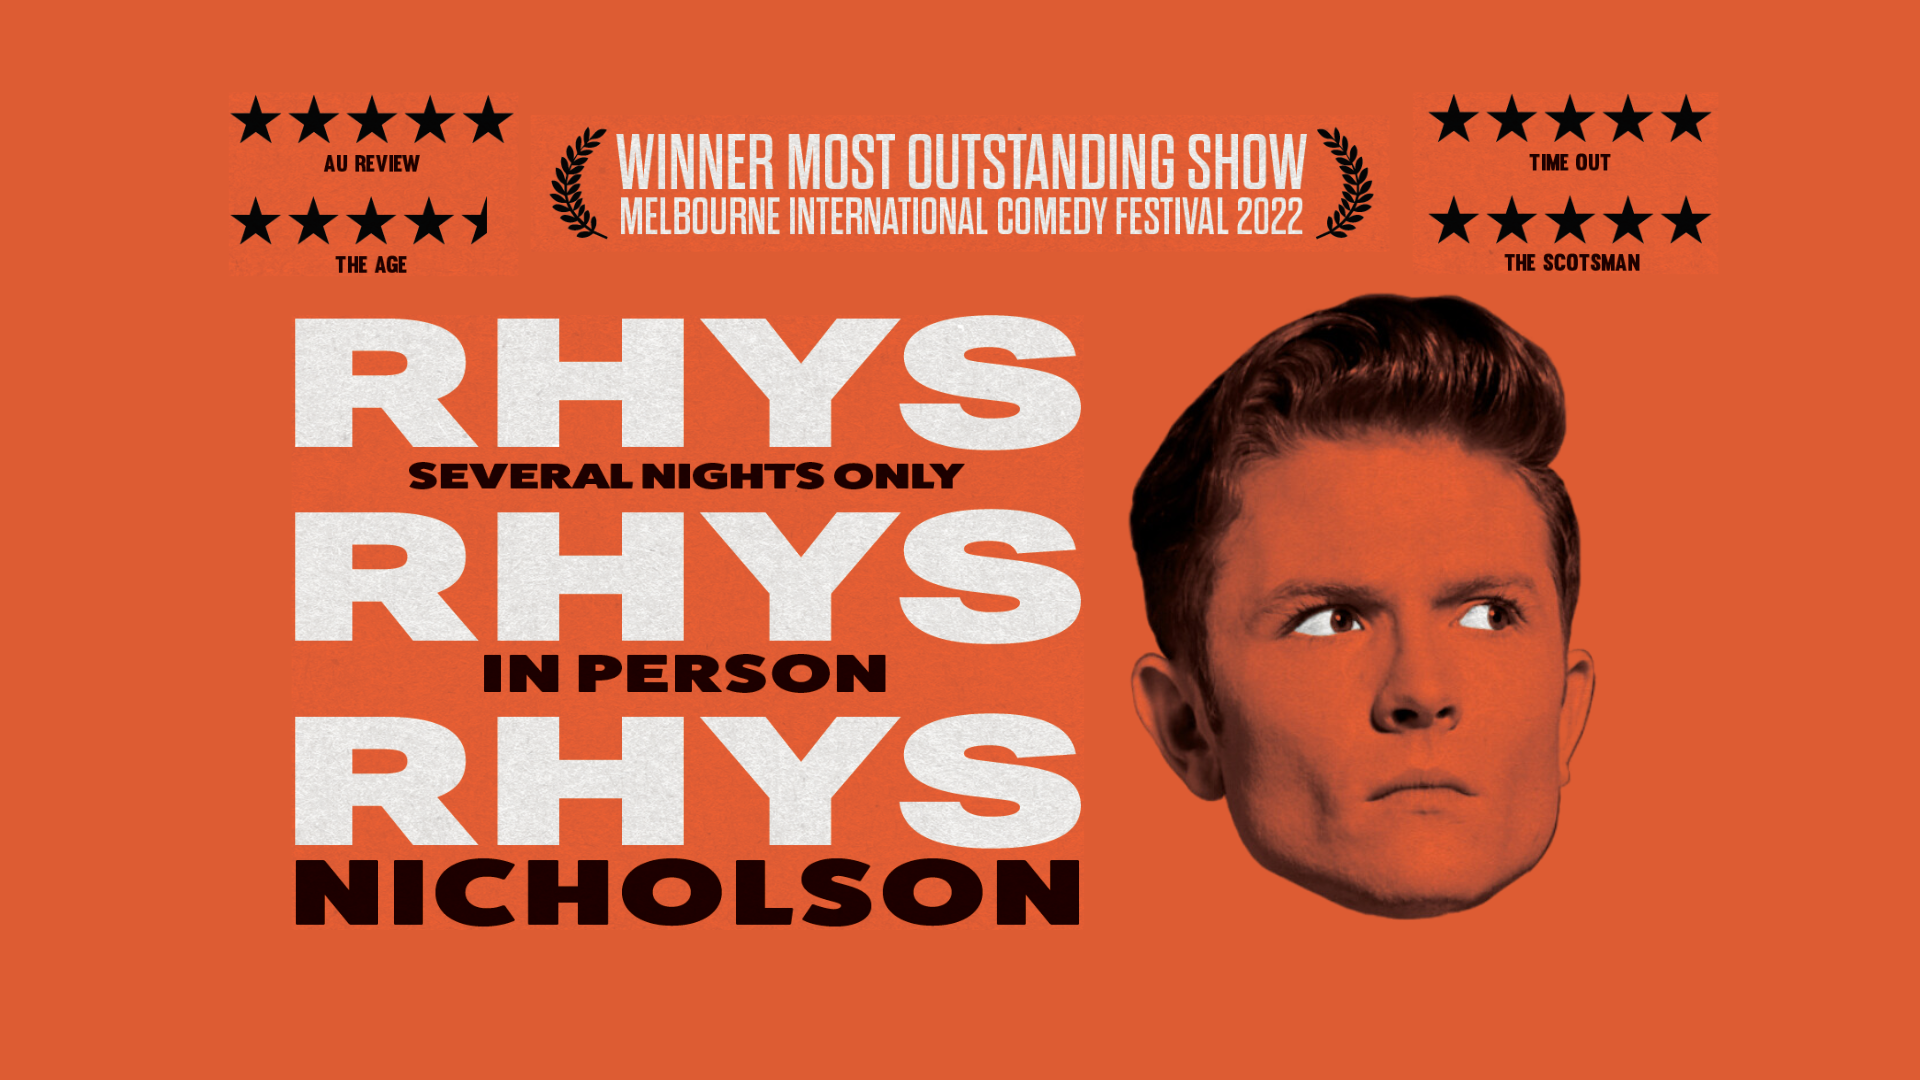 Rhys Nicholson is going on Tour in the UK